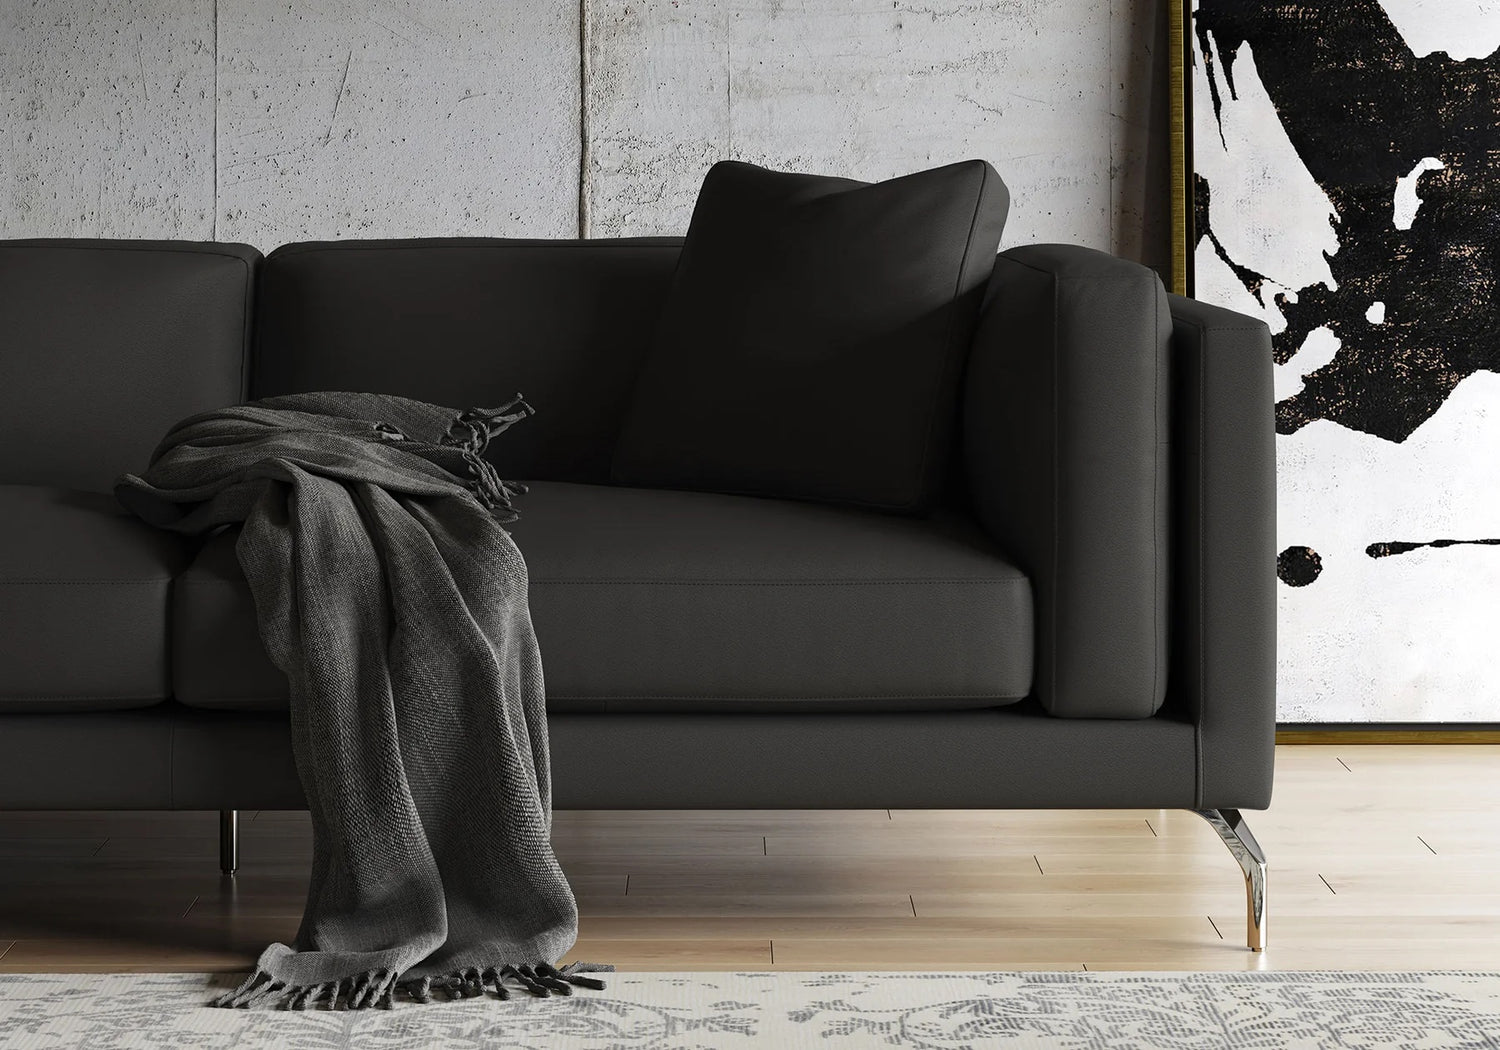 A modern black sofa with clean lines is placed in a living room with a large abstract black and white painting behind it. A dark grey throw blanket is draped over the arm of the sofa. The room features a light-colored wooden floor and a patterned rug.